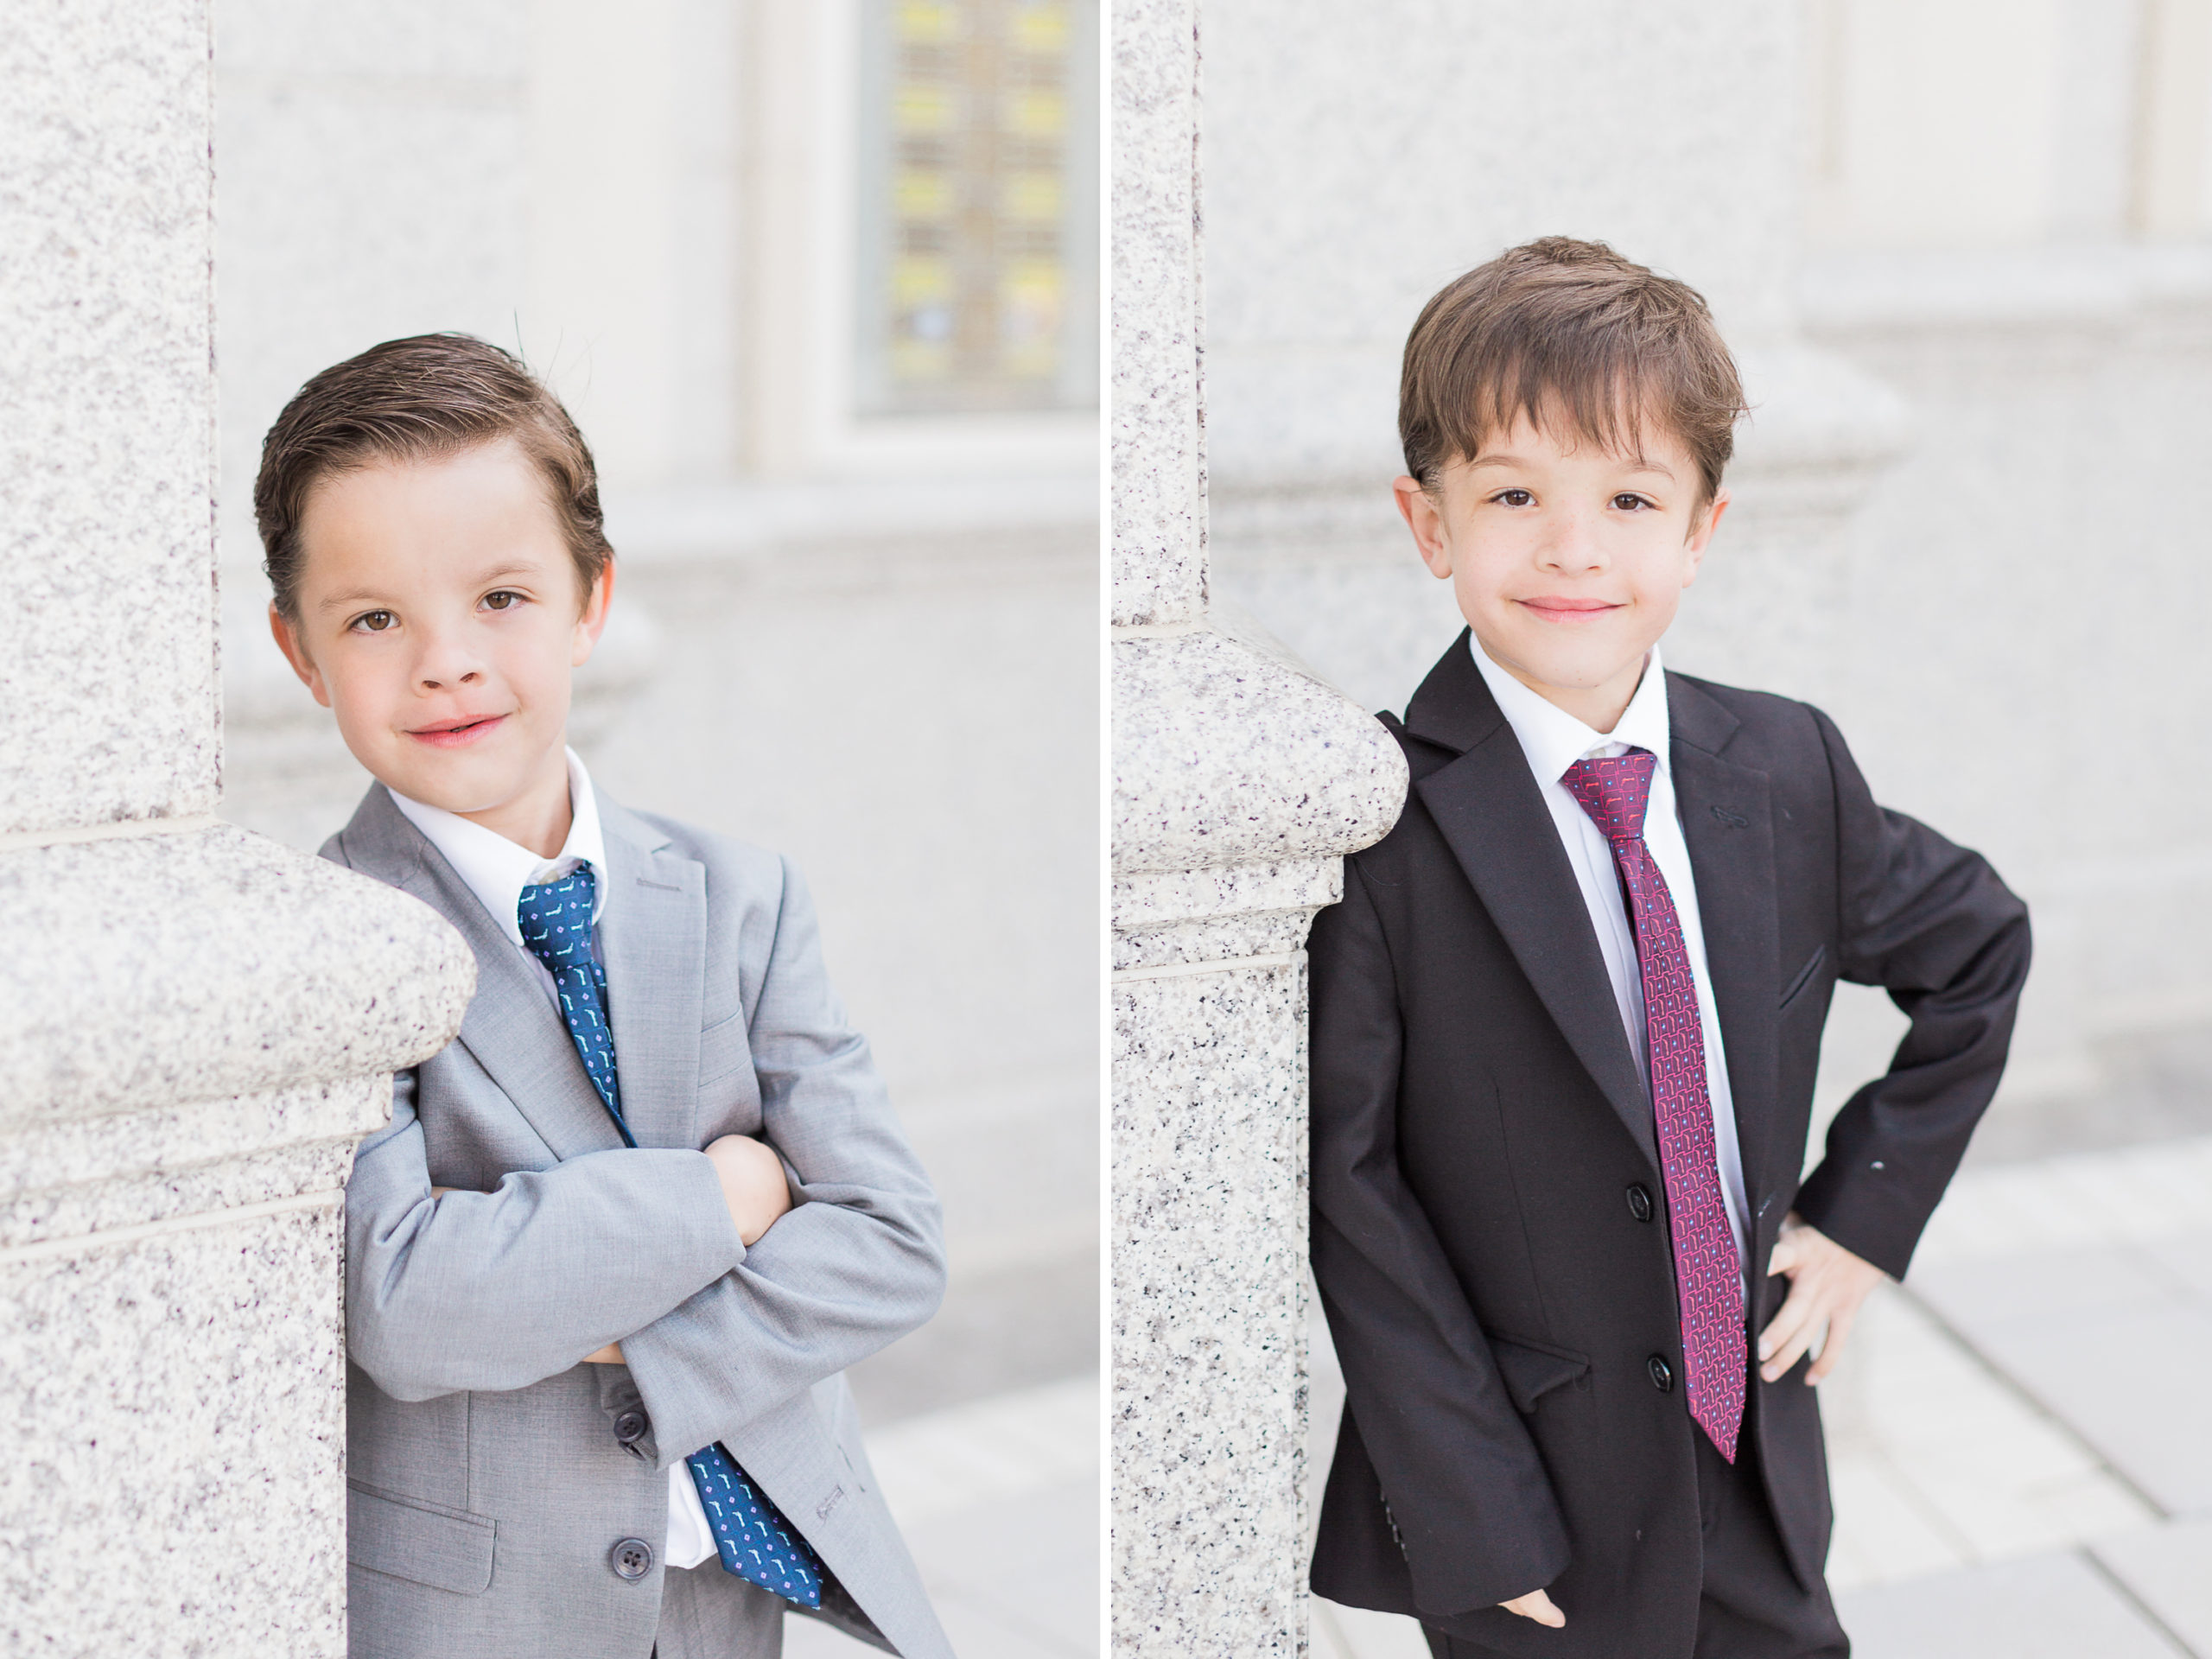 Two little boys pose like adults during their birthday photo session